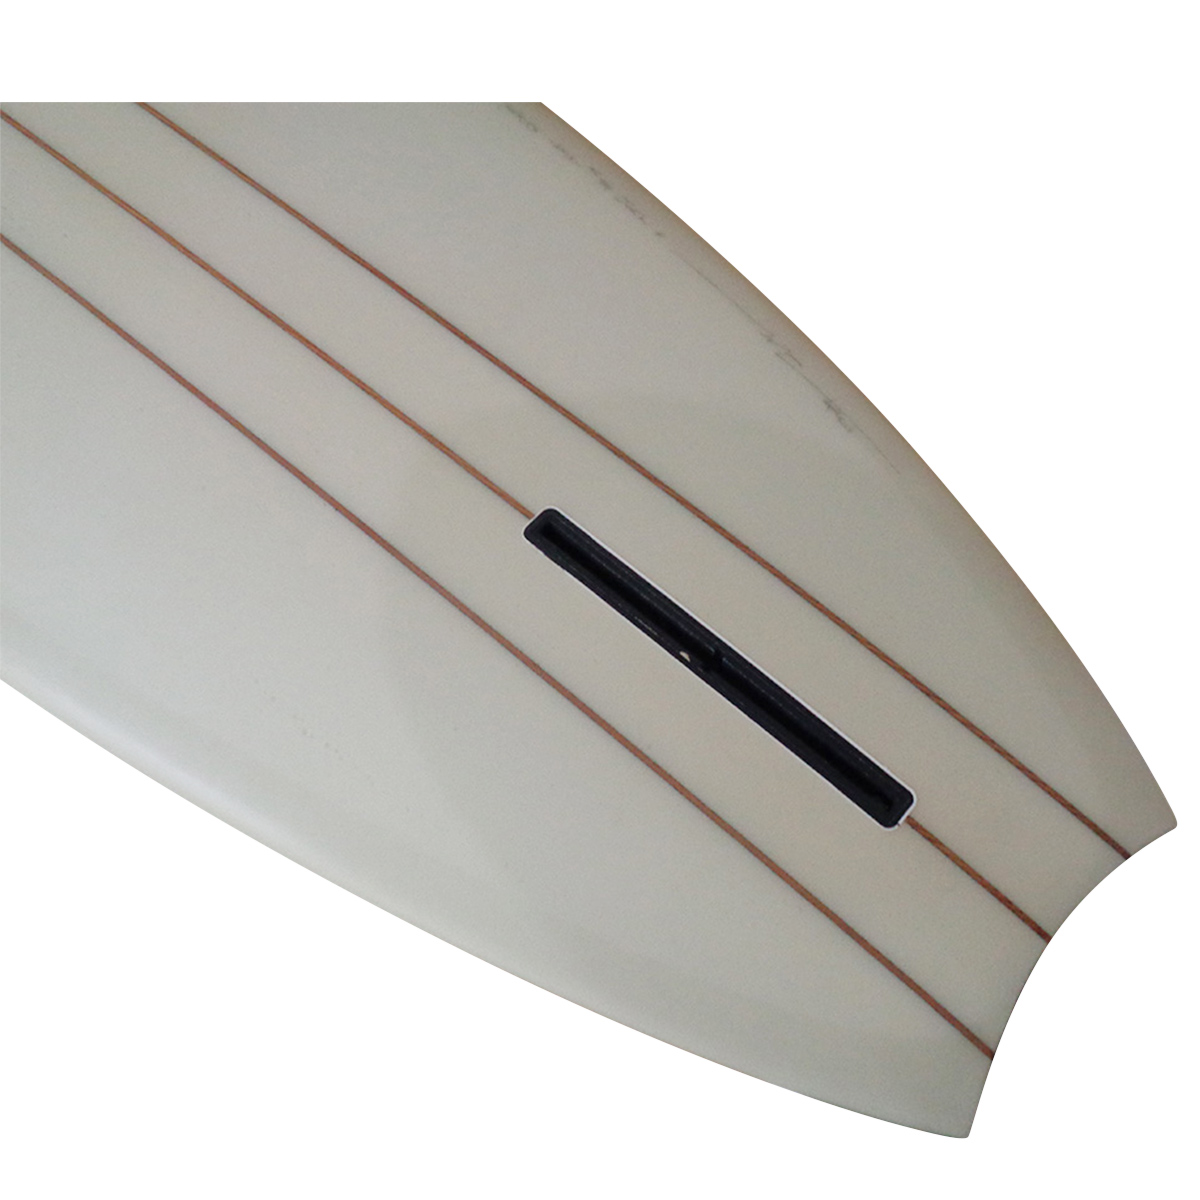 TUDOR SURFBOARDS / CRESCENT 9`8 Shaped by Wayne Rich